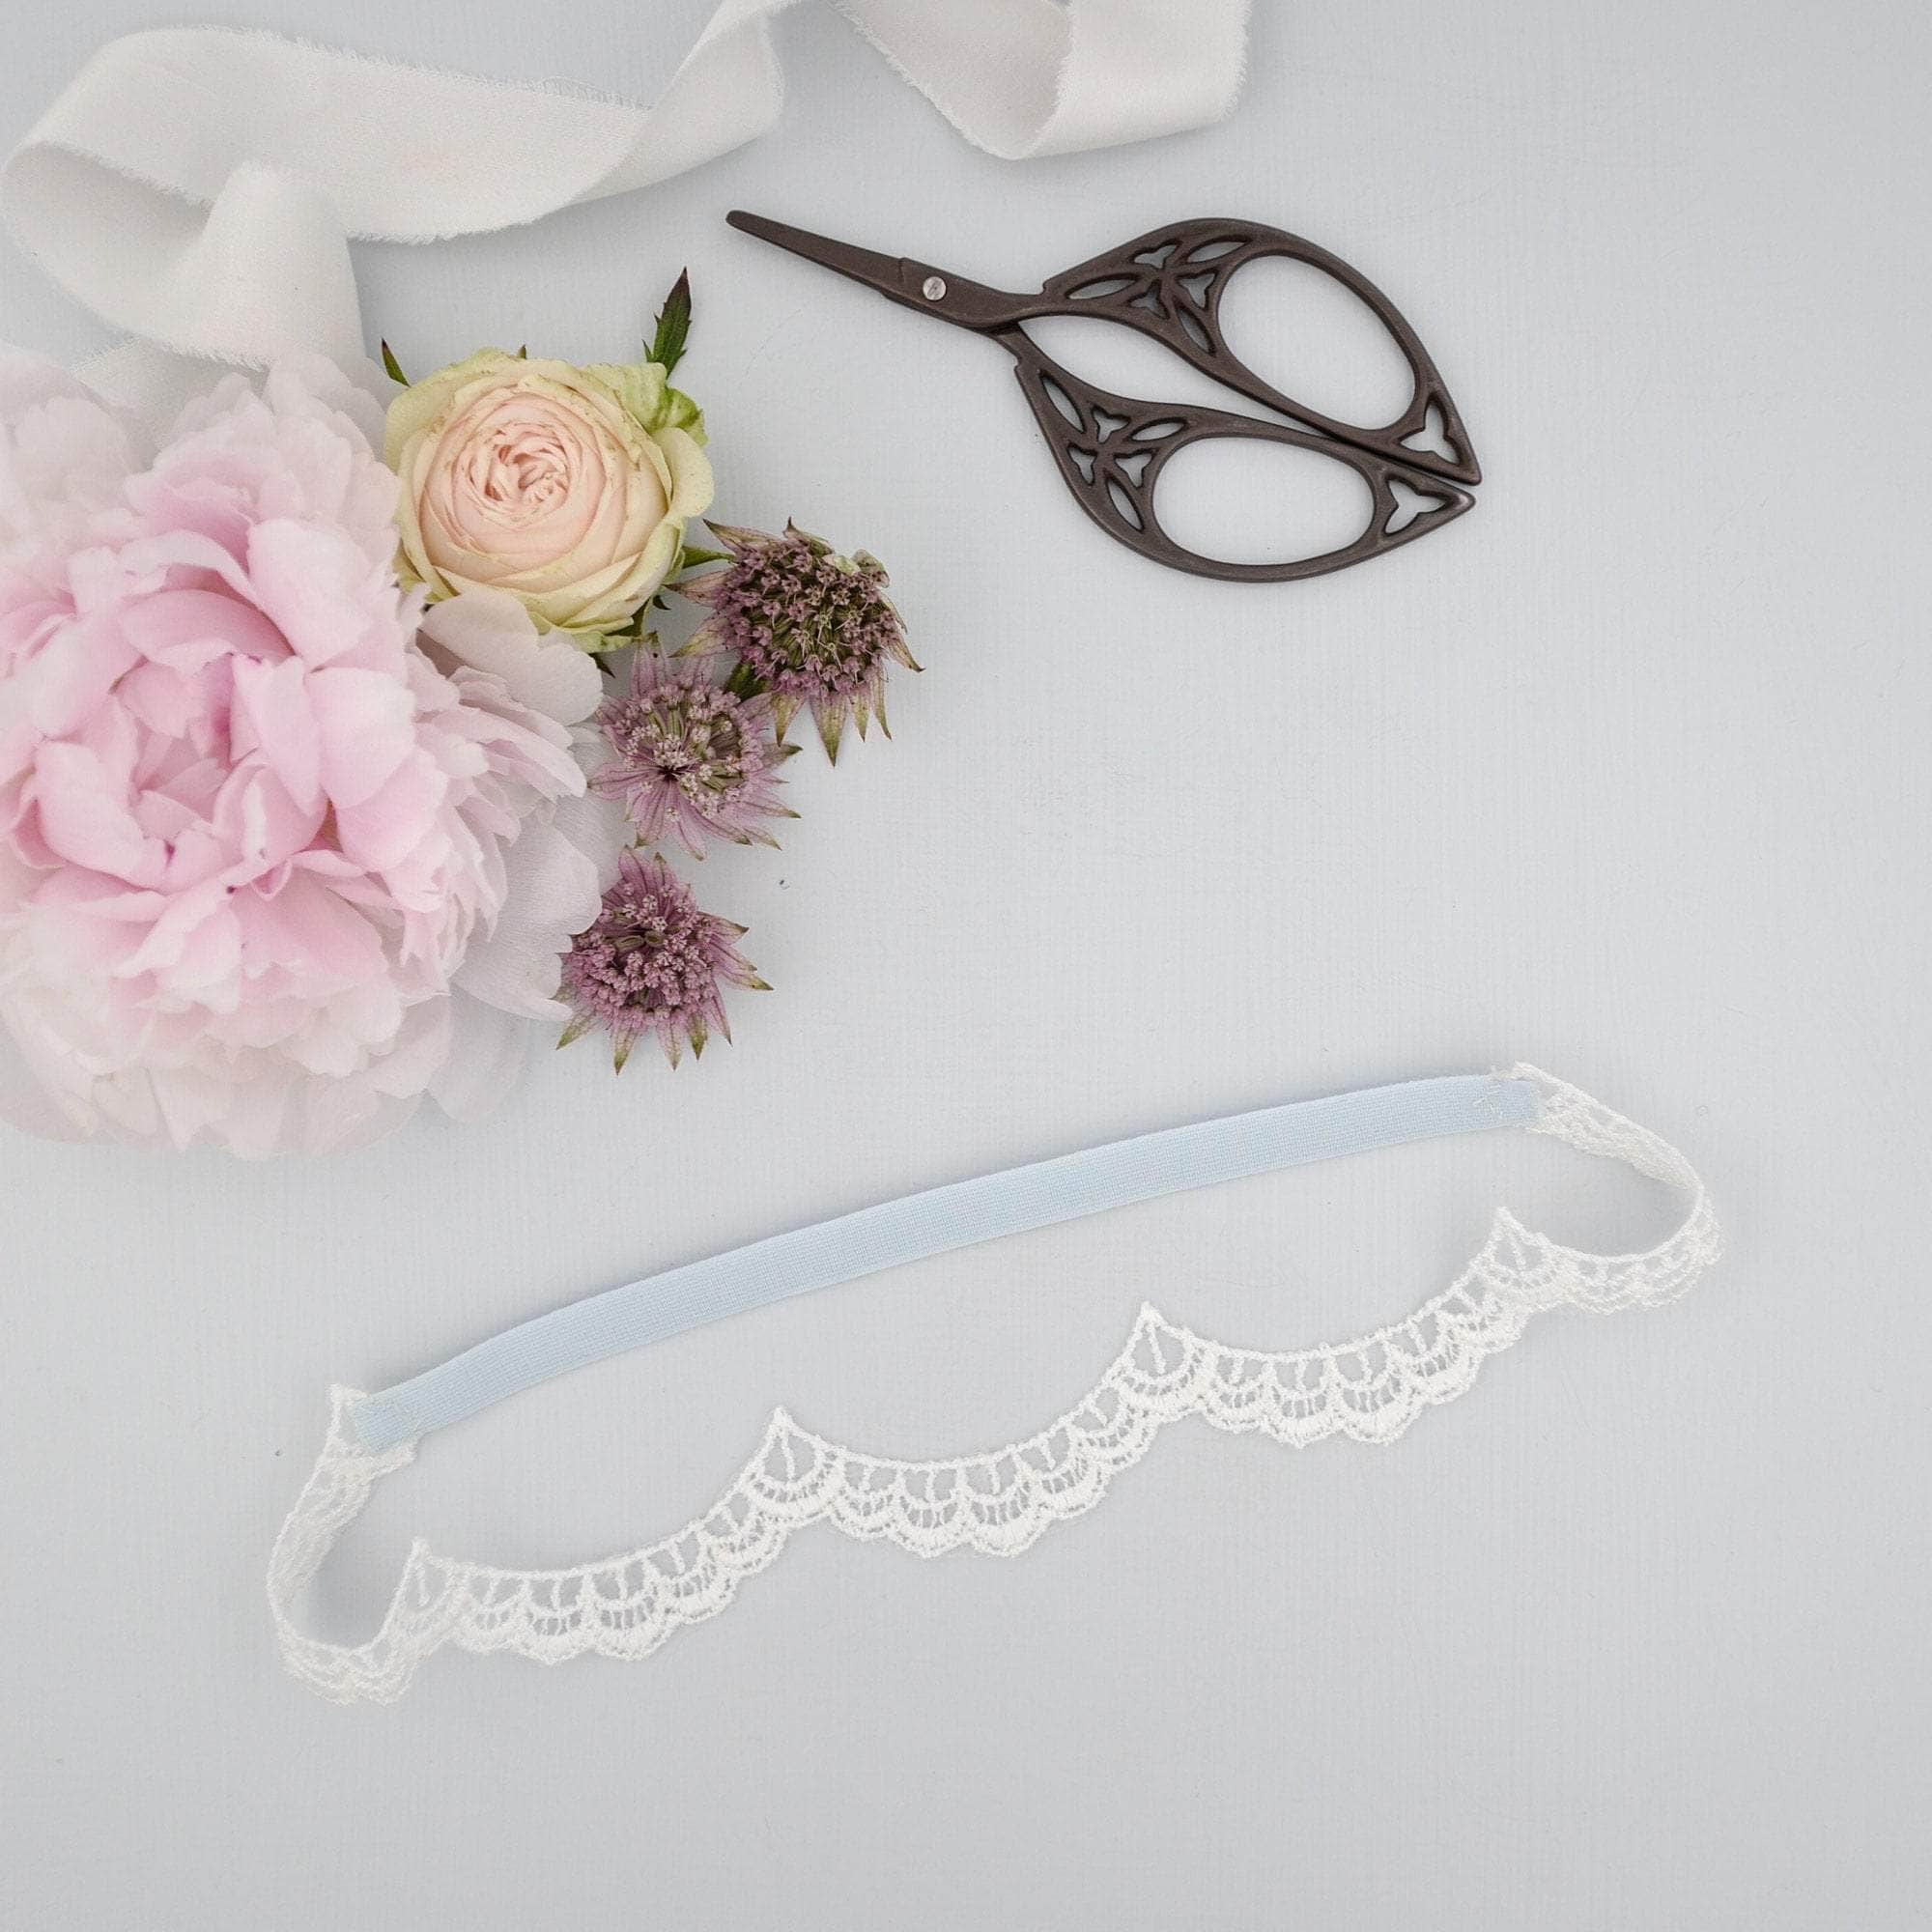 Wedding Garter 'Something blue' and delicate scalloped lace garter - 'Ada'